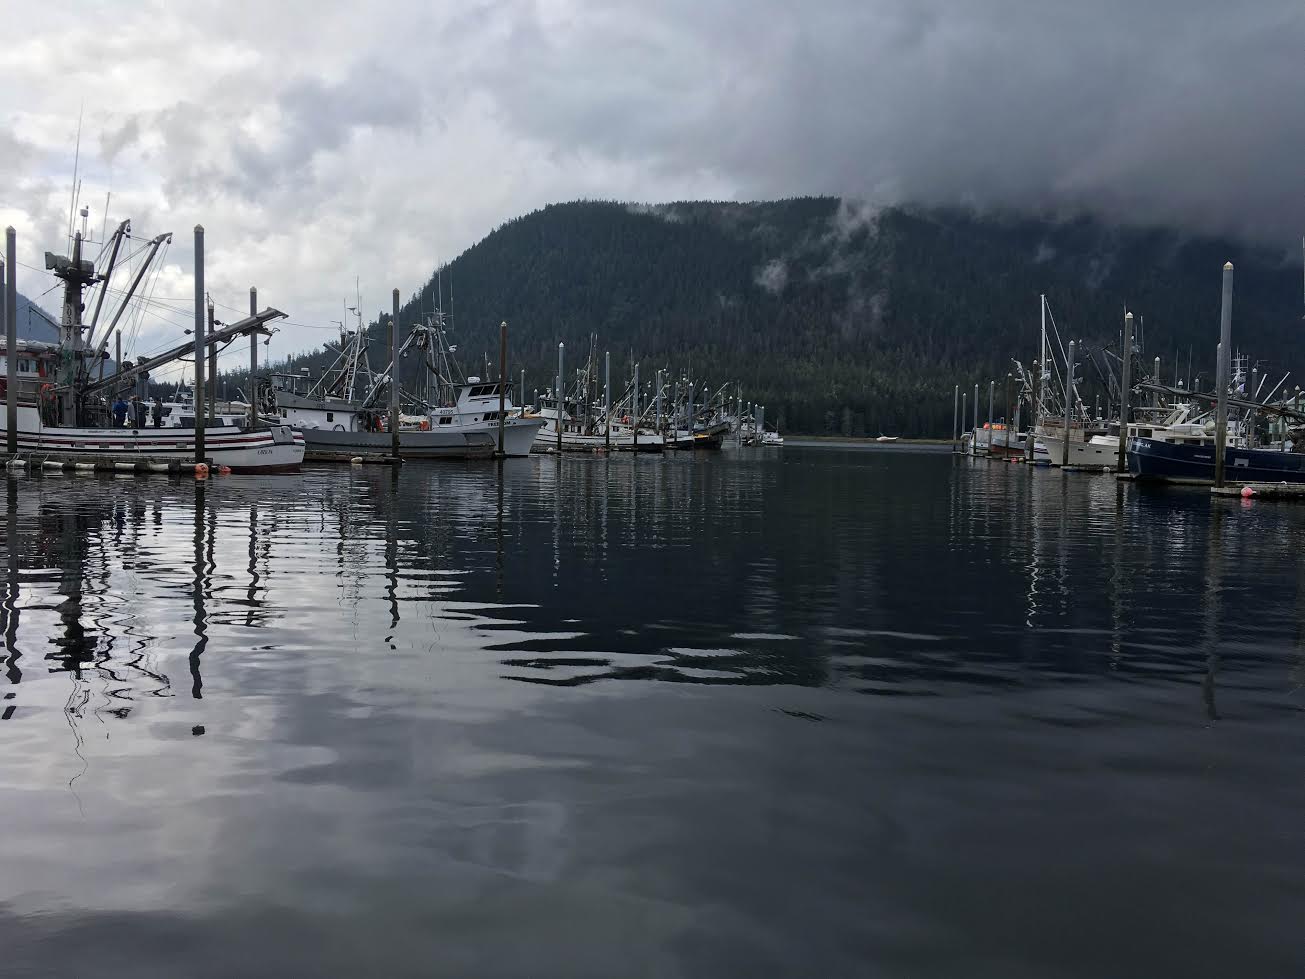 Despite a one-day seining opening in the region, many seiners docked in Petersburg and removed their nets. (Photo, Abbey Collins - KFSK - Petersburg)